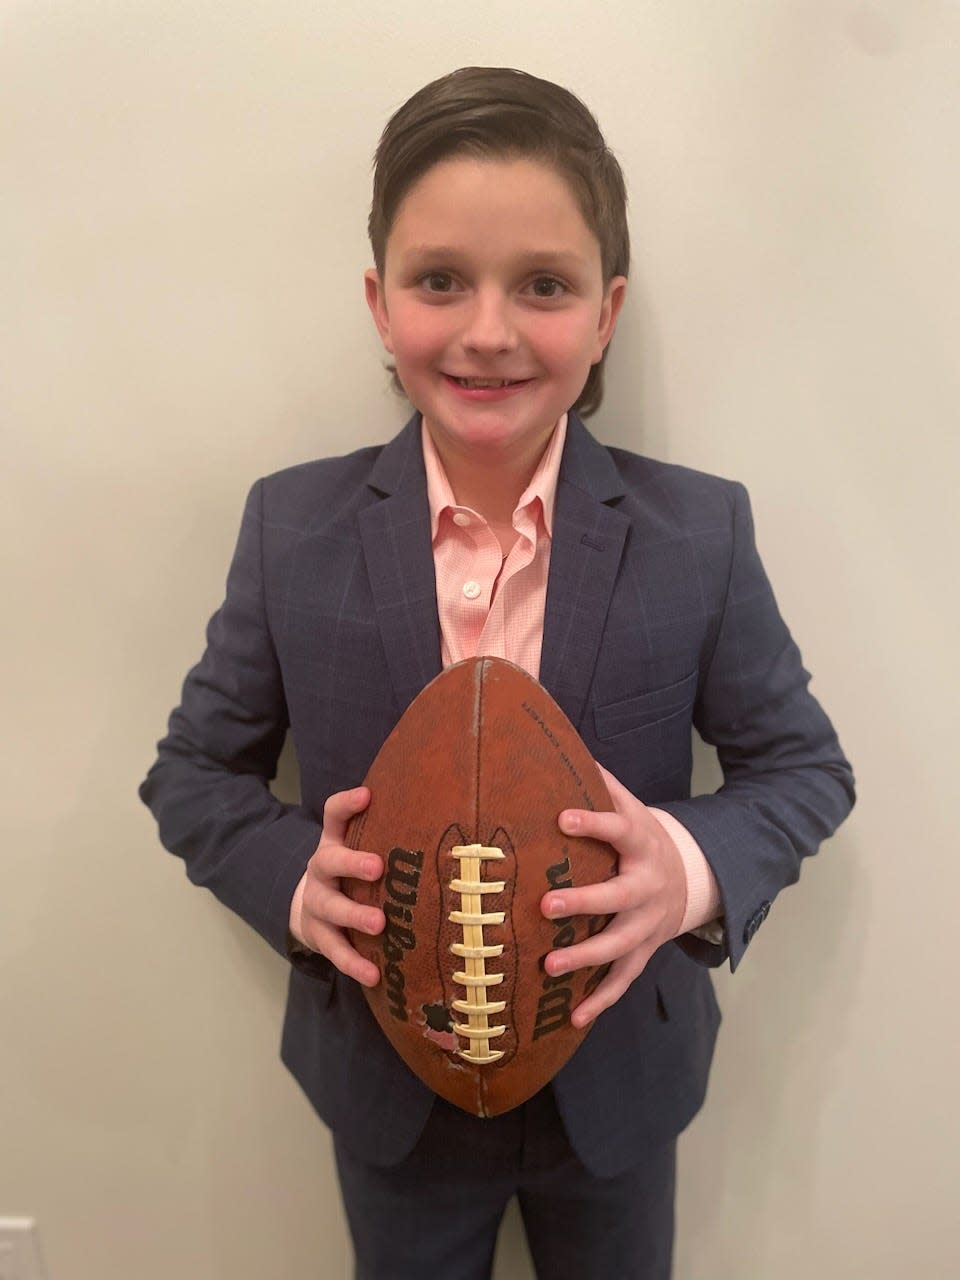 Miles Waage, 11, of Waukee, won the Panini "Kid reporter" contest out of 135,000 entrants nationwide. Waage will interview Kansas City Chiefs and Philadelphia Eagles players at Super Bowl Opening Night Monday and attend the Super Bowl on Feb. 12.